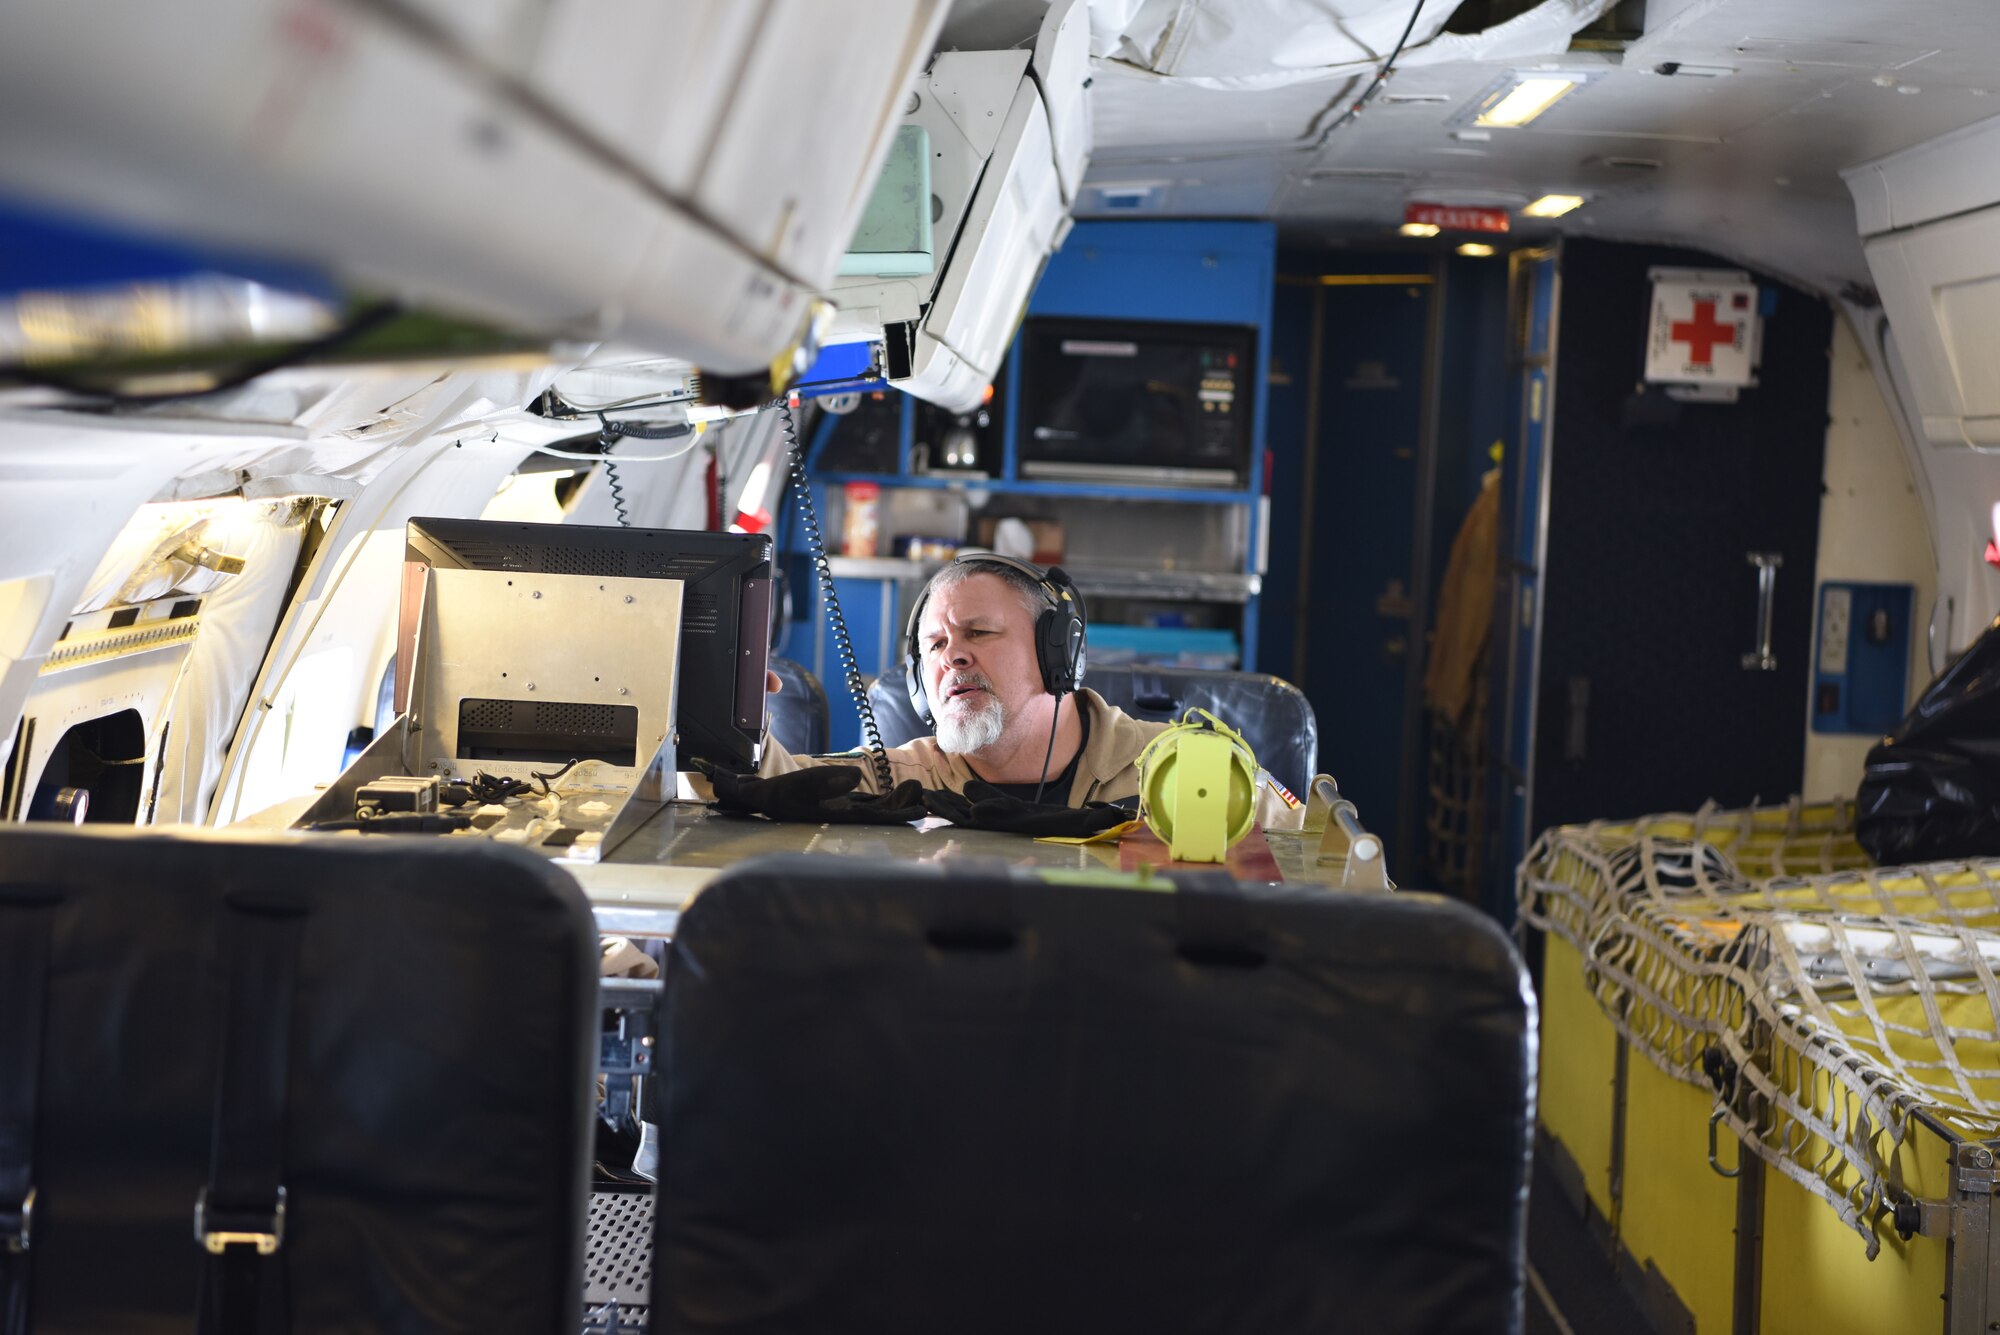 Lyn Lohberger, NASA Armstrong flight research center safety technician, checks diagnostics of the aircraft midflight, Jan. 31, 2018. Lohberger is a contractor for NASA and has been employed by them for 11 years.